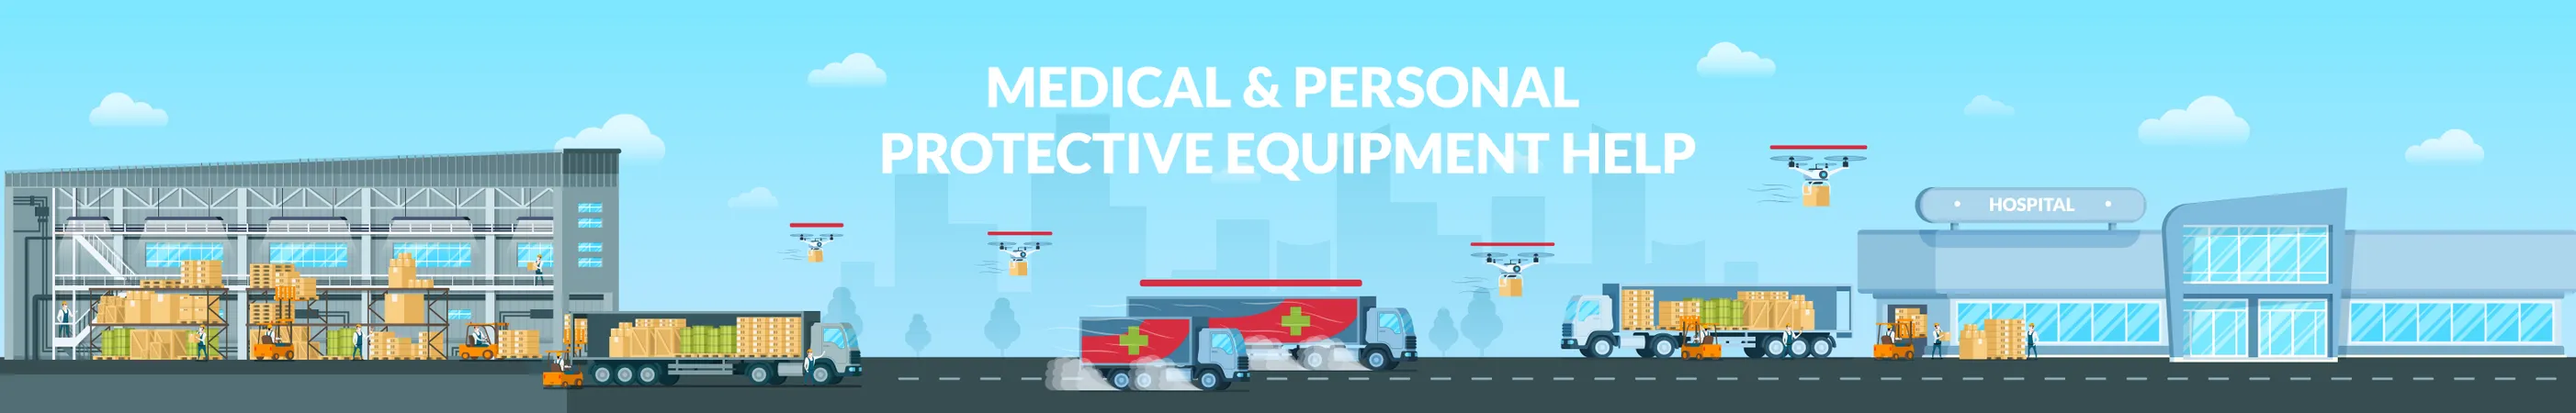 Medical and Personal Protective Equipment Help  Illustration